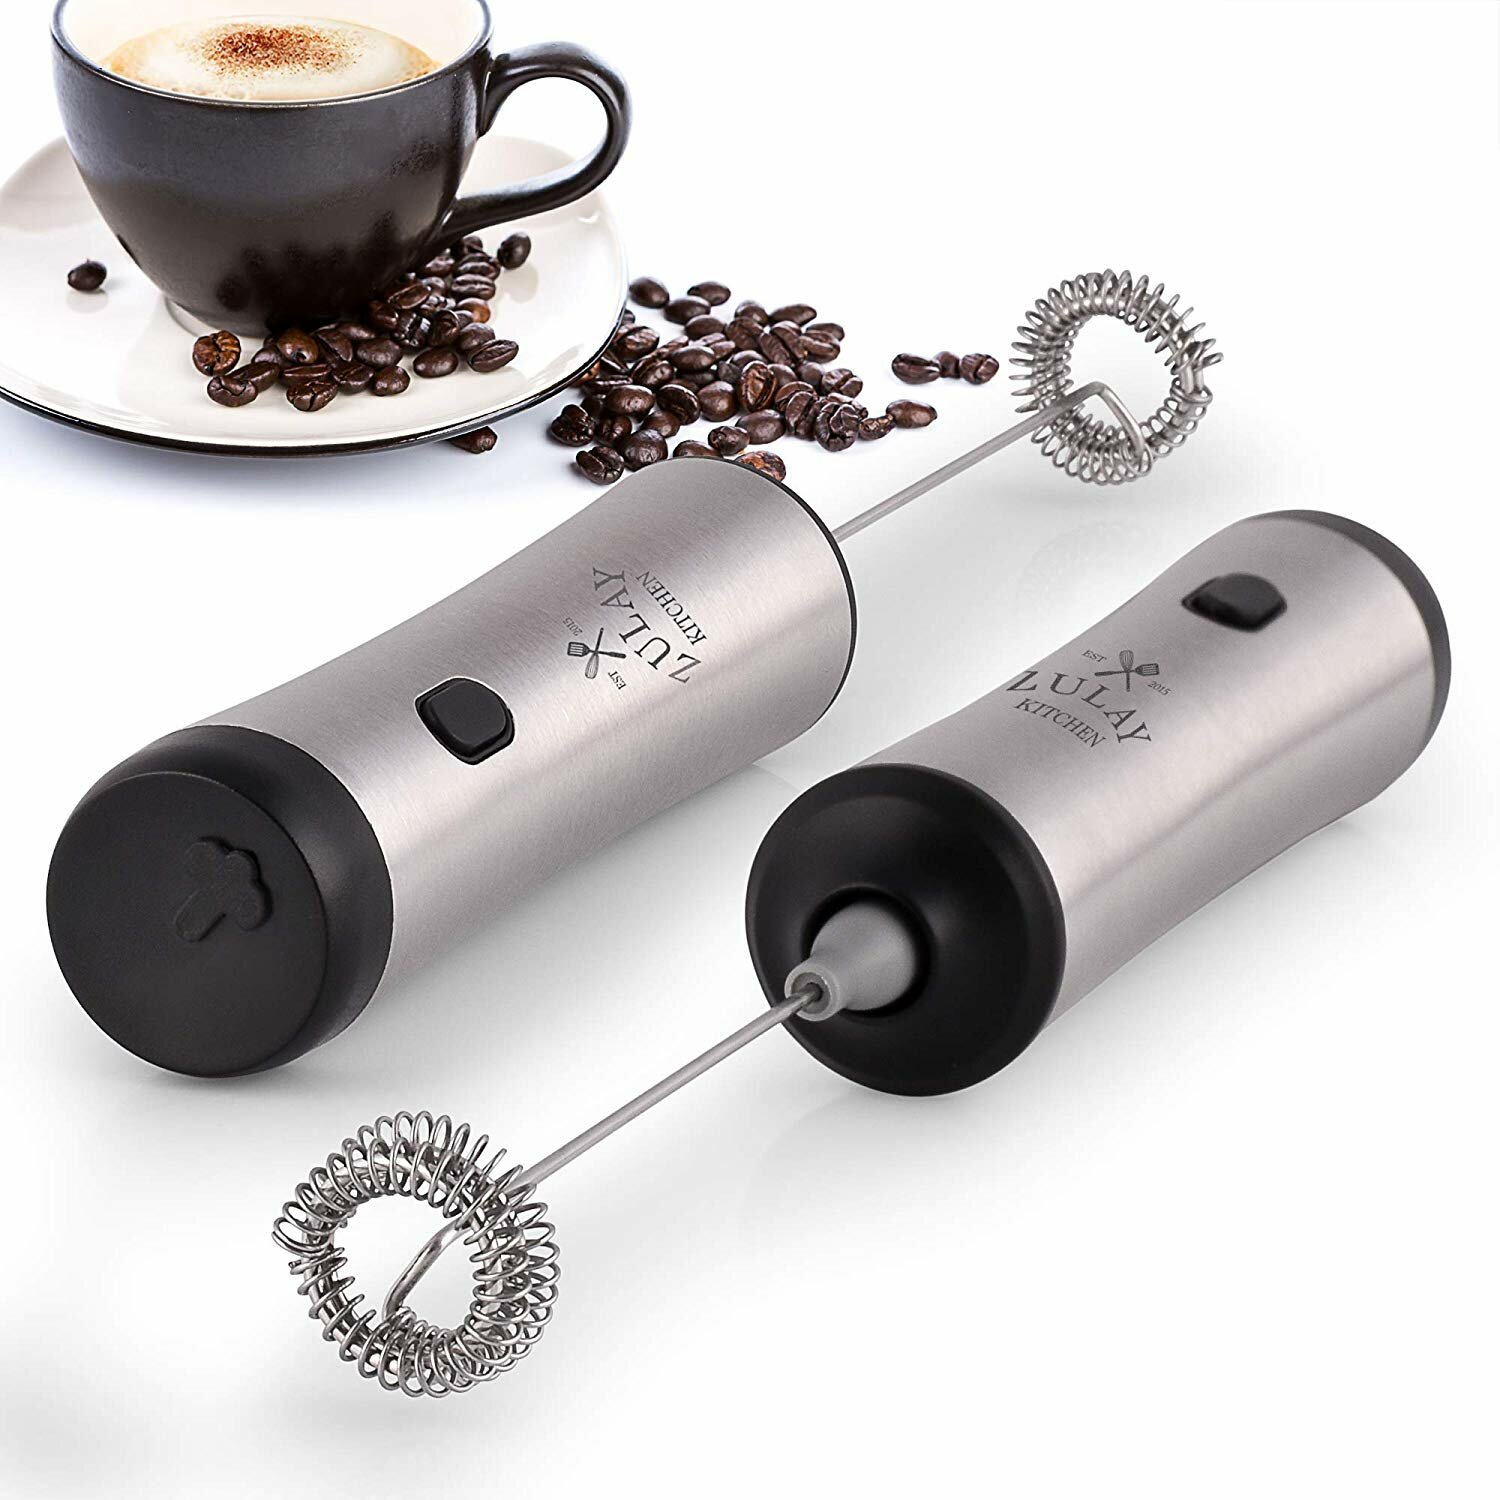 BonJour Rechargeable Hand-Held Beverage Manual Milk Frother